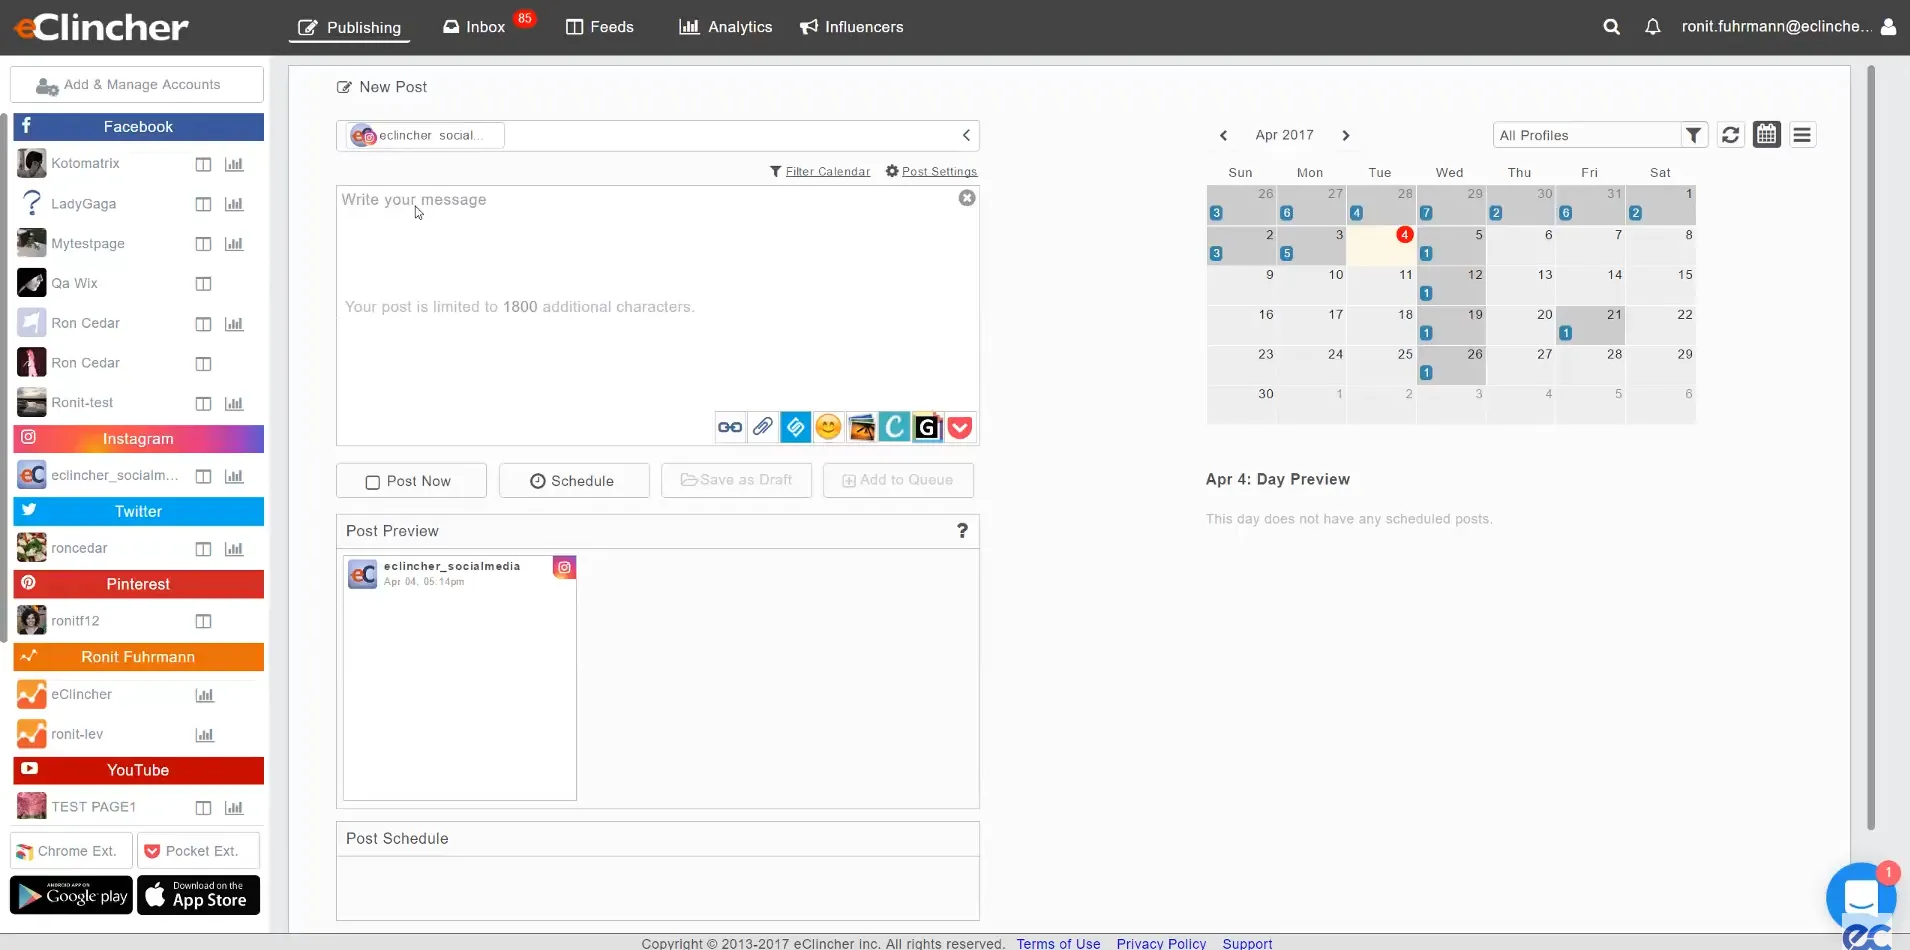  eClincher is a full-blown management tool that helps publish or schedule posts to Instagram